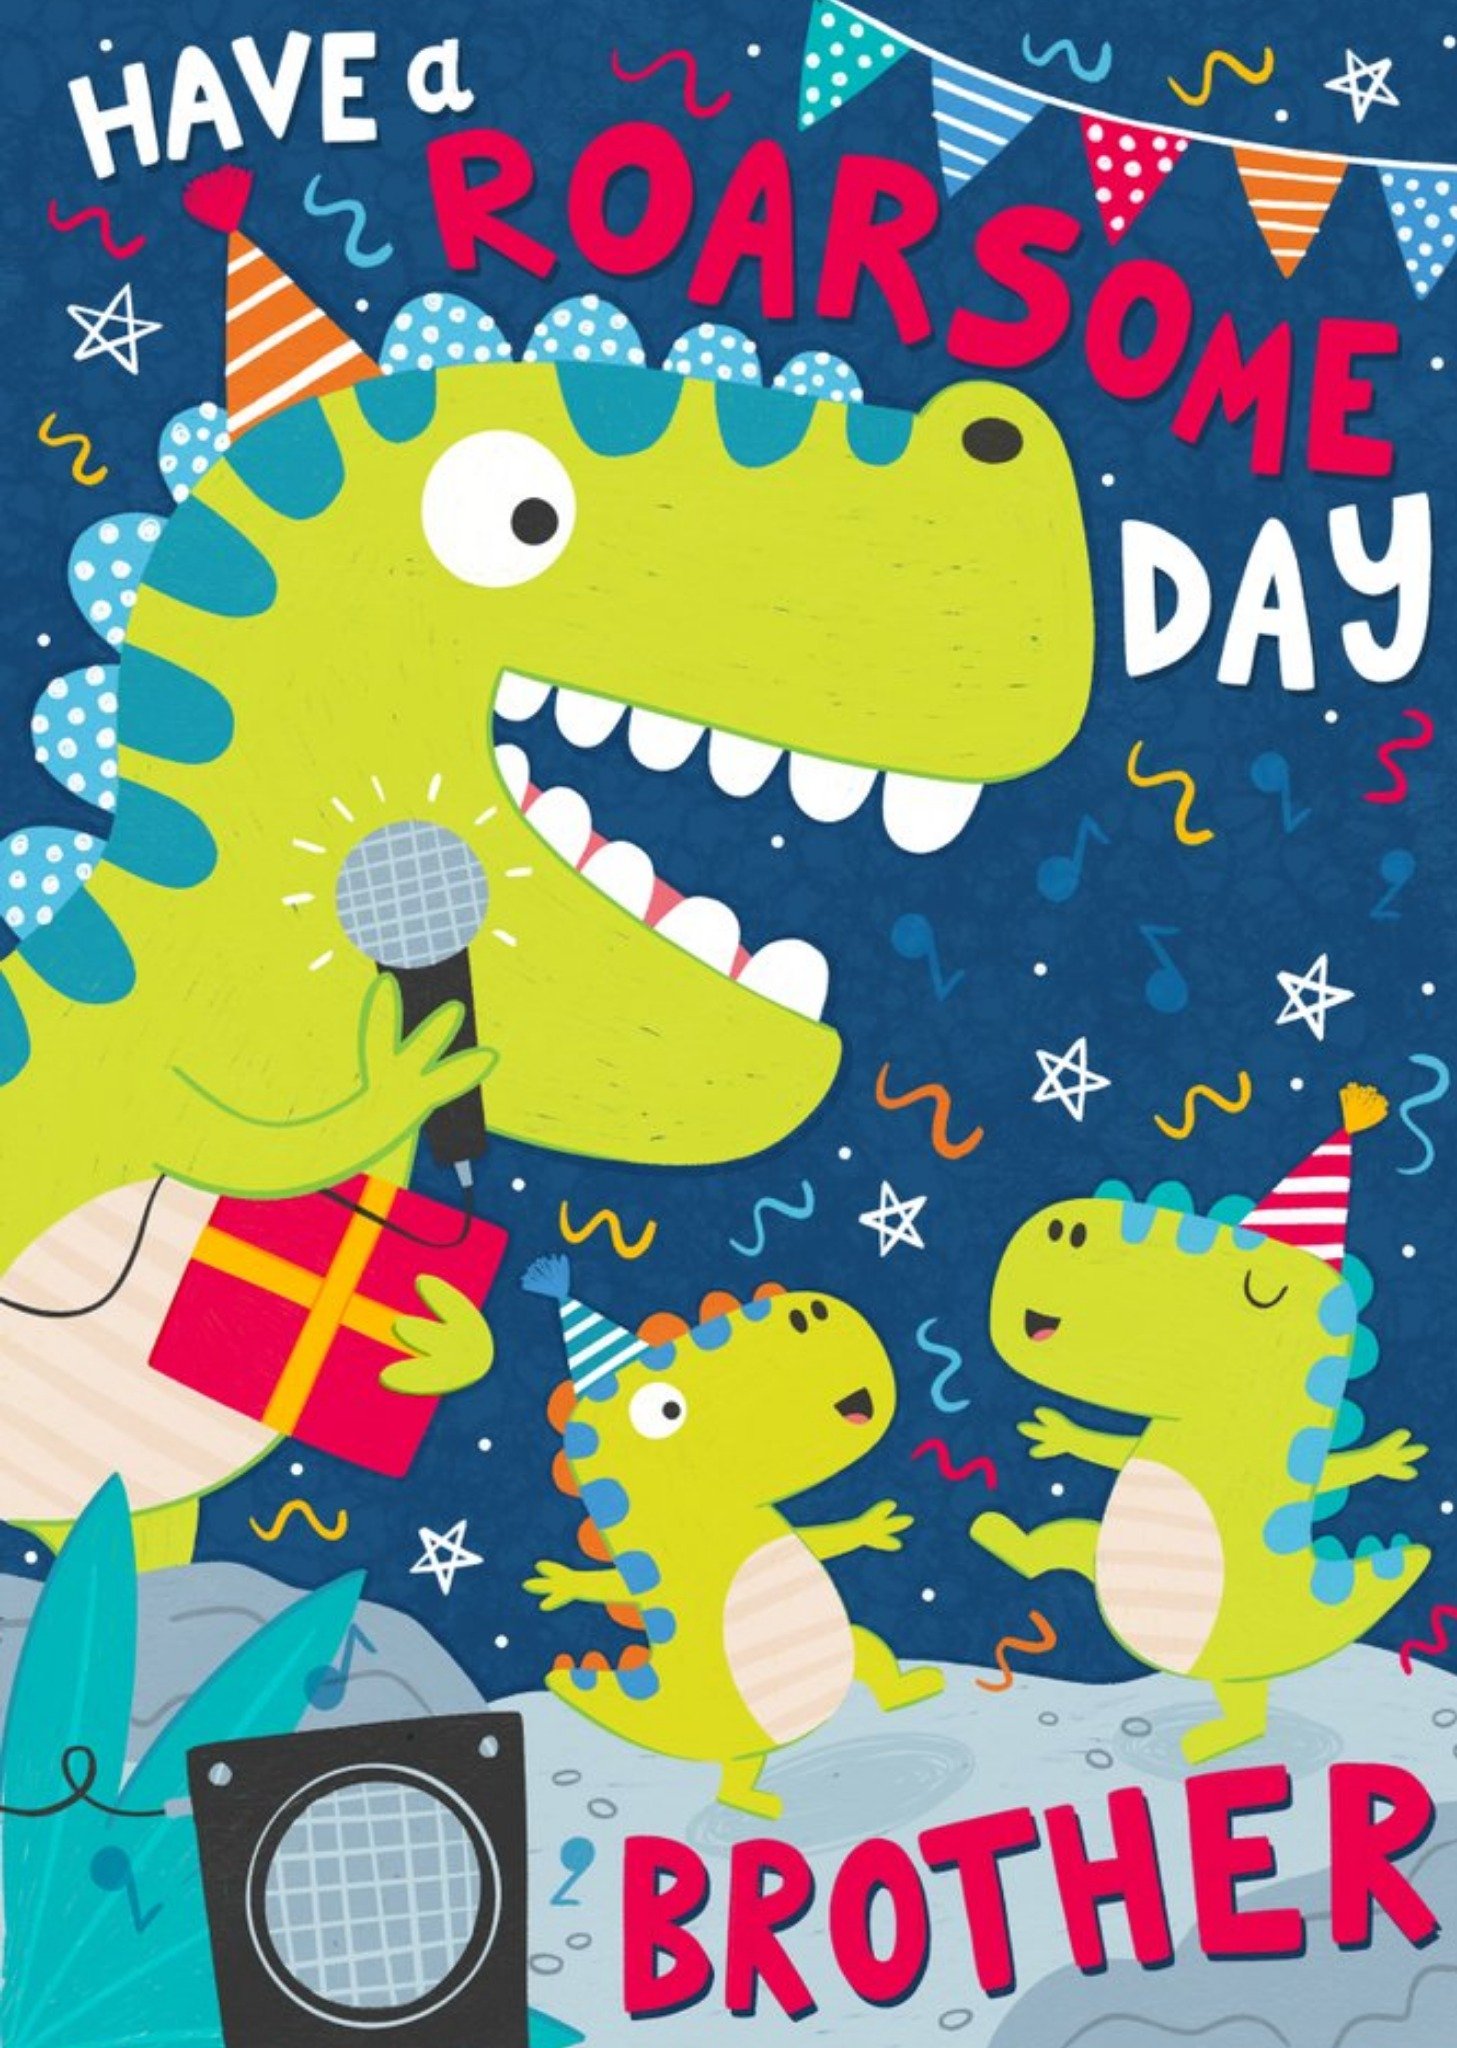 Moonpig Fun Illustration Design Dinosaur Party Balloons Have A Roarsome Day Birthday Card, Large